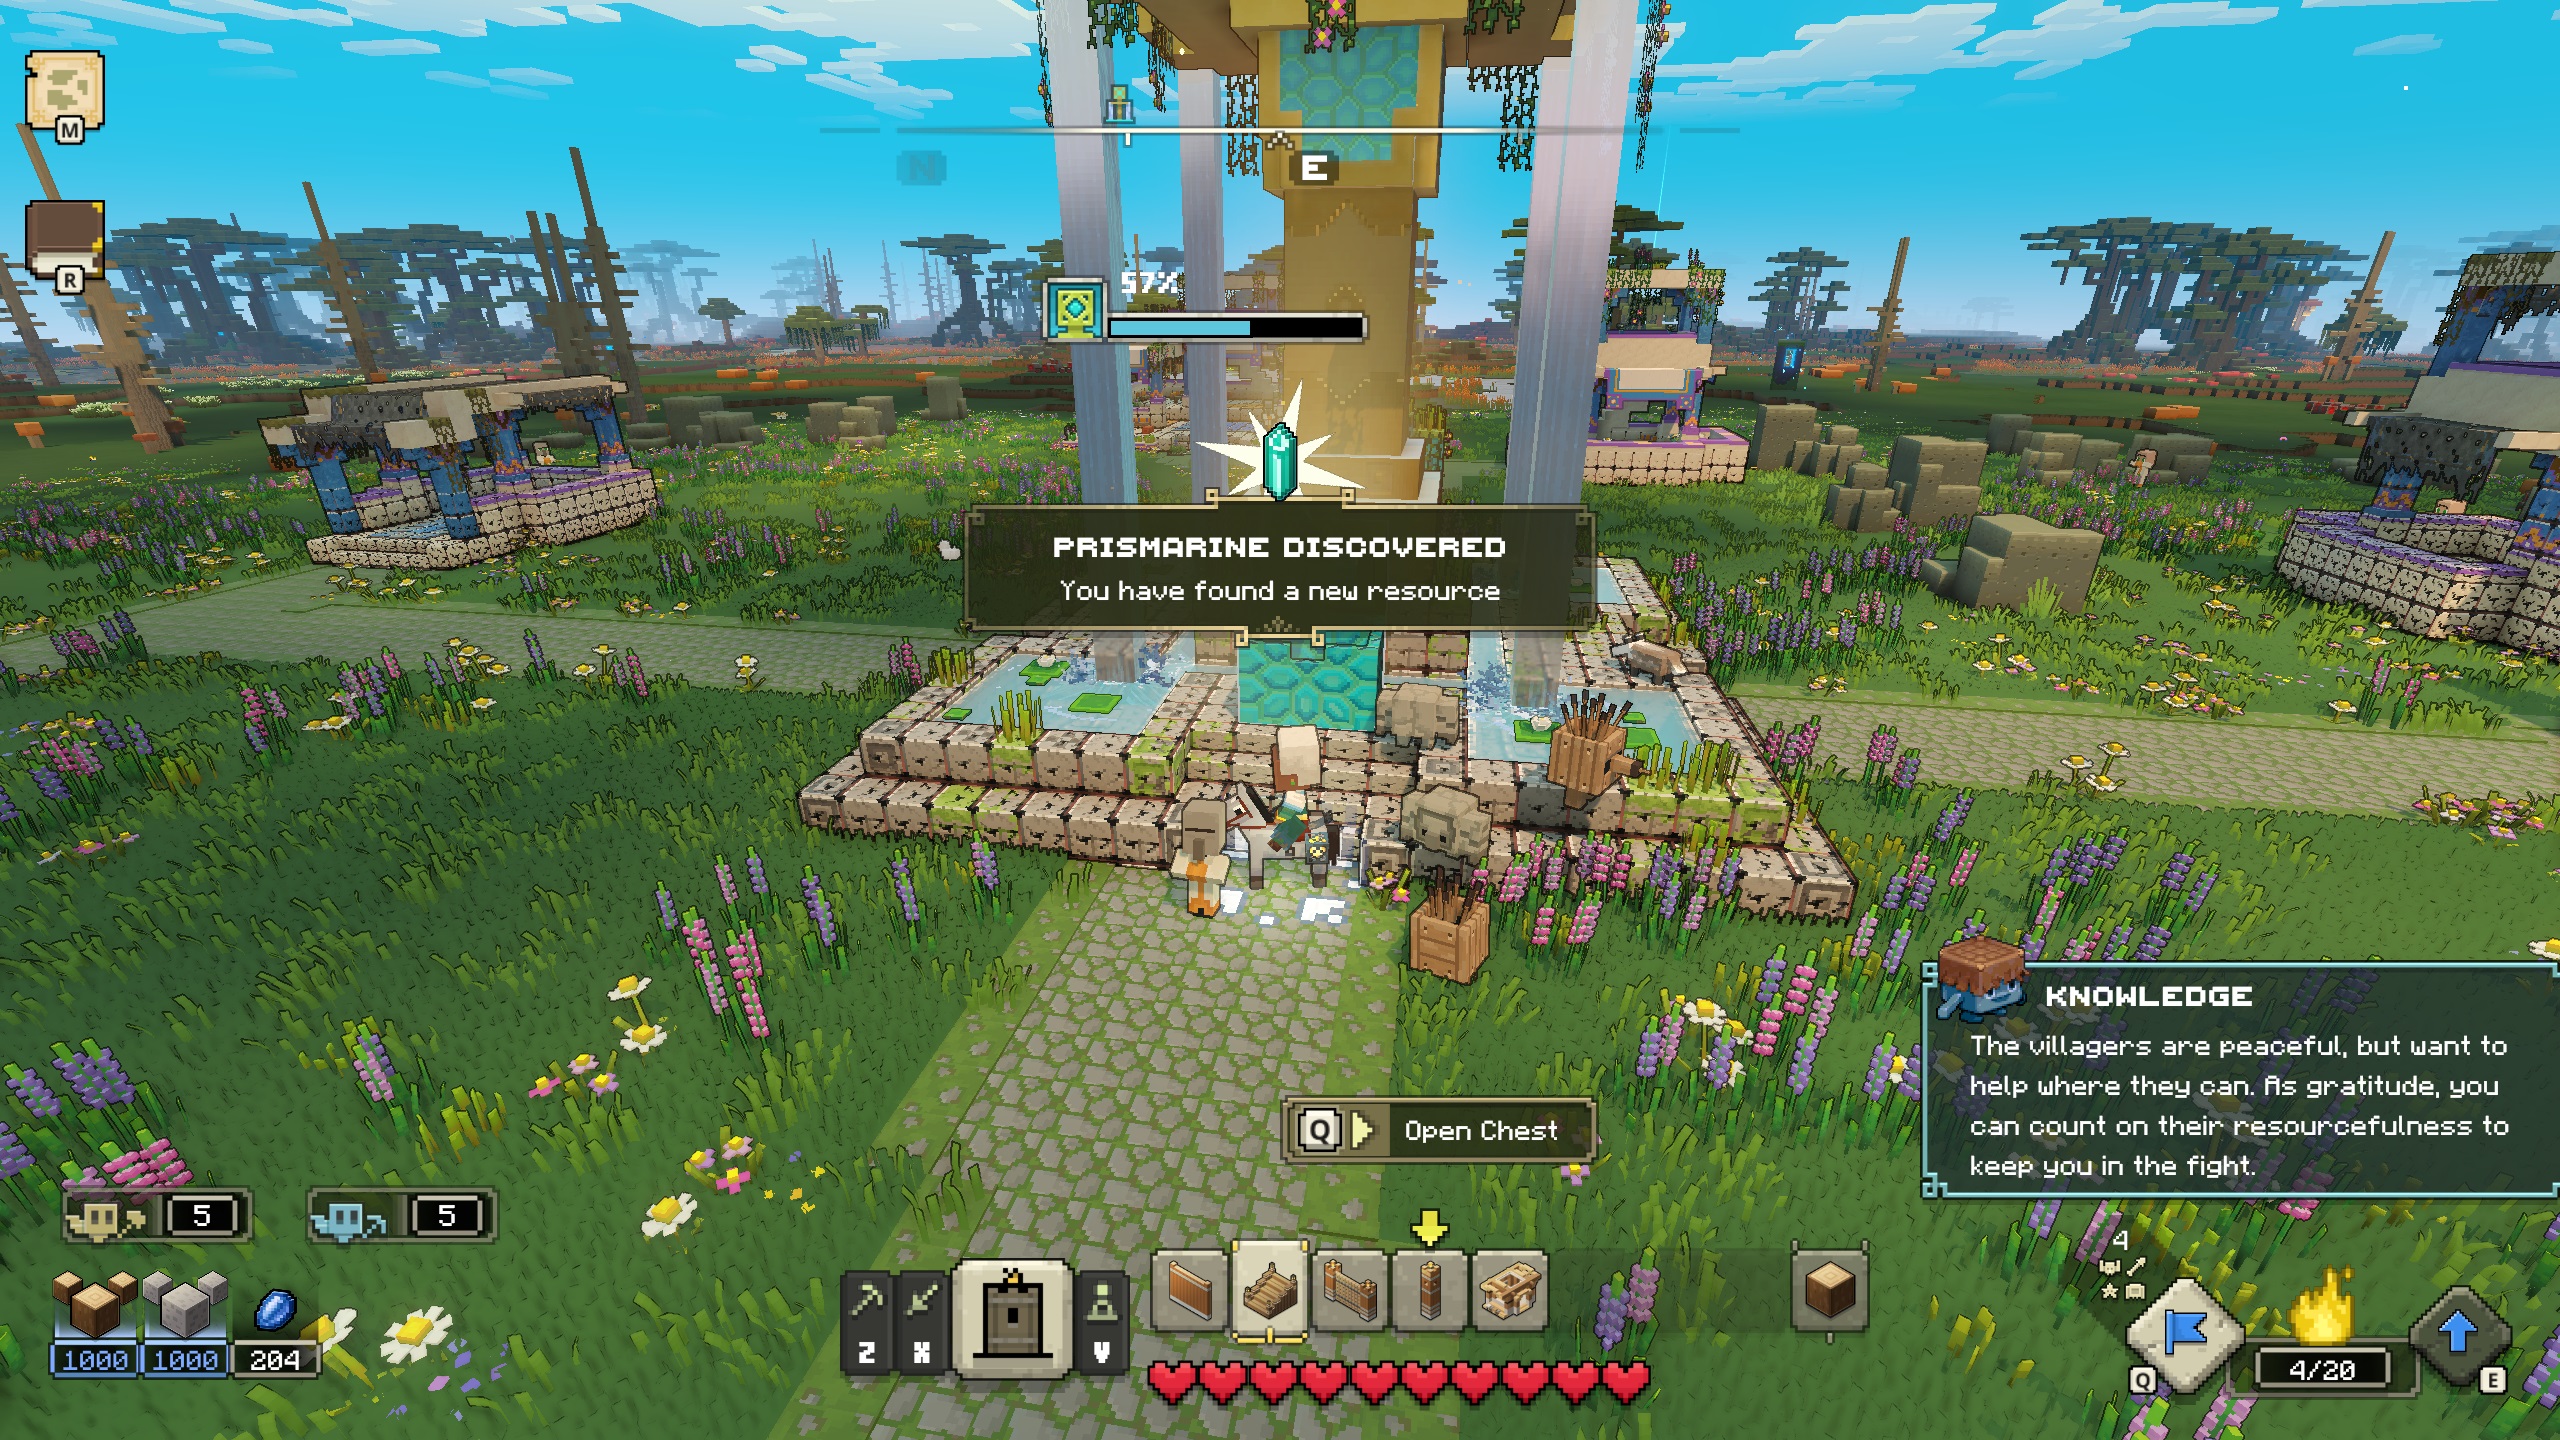 Minecraft Legends Multiplayer: How to Play Co-Op and Cross Platform